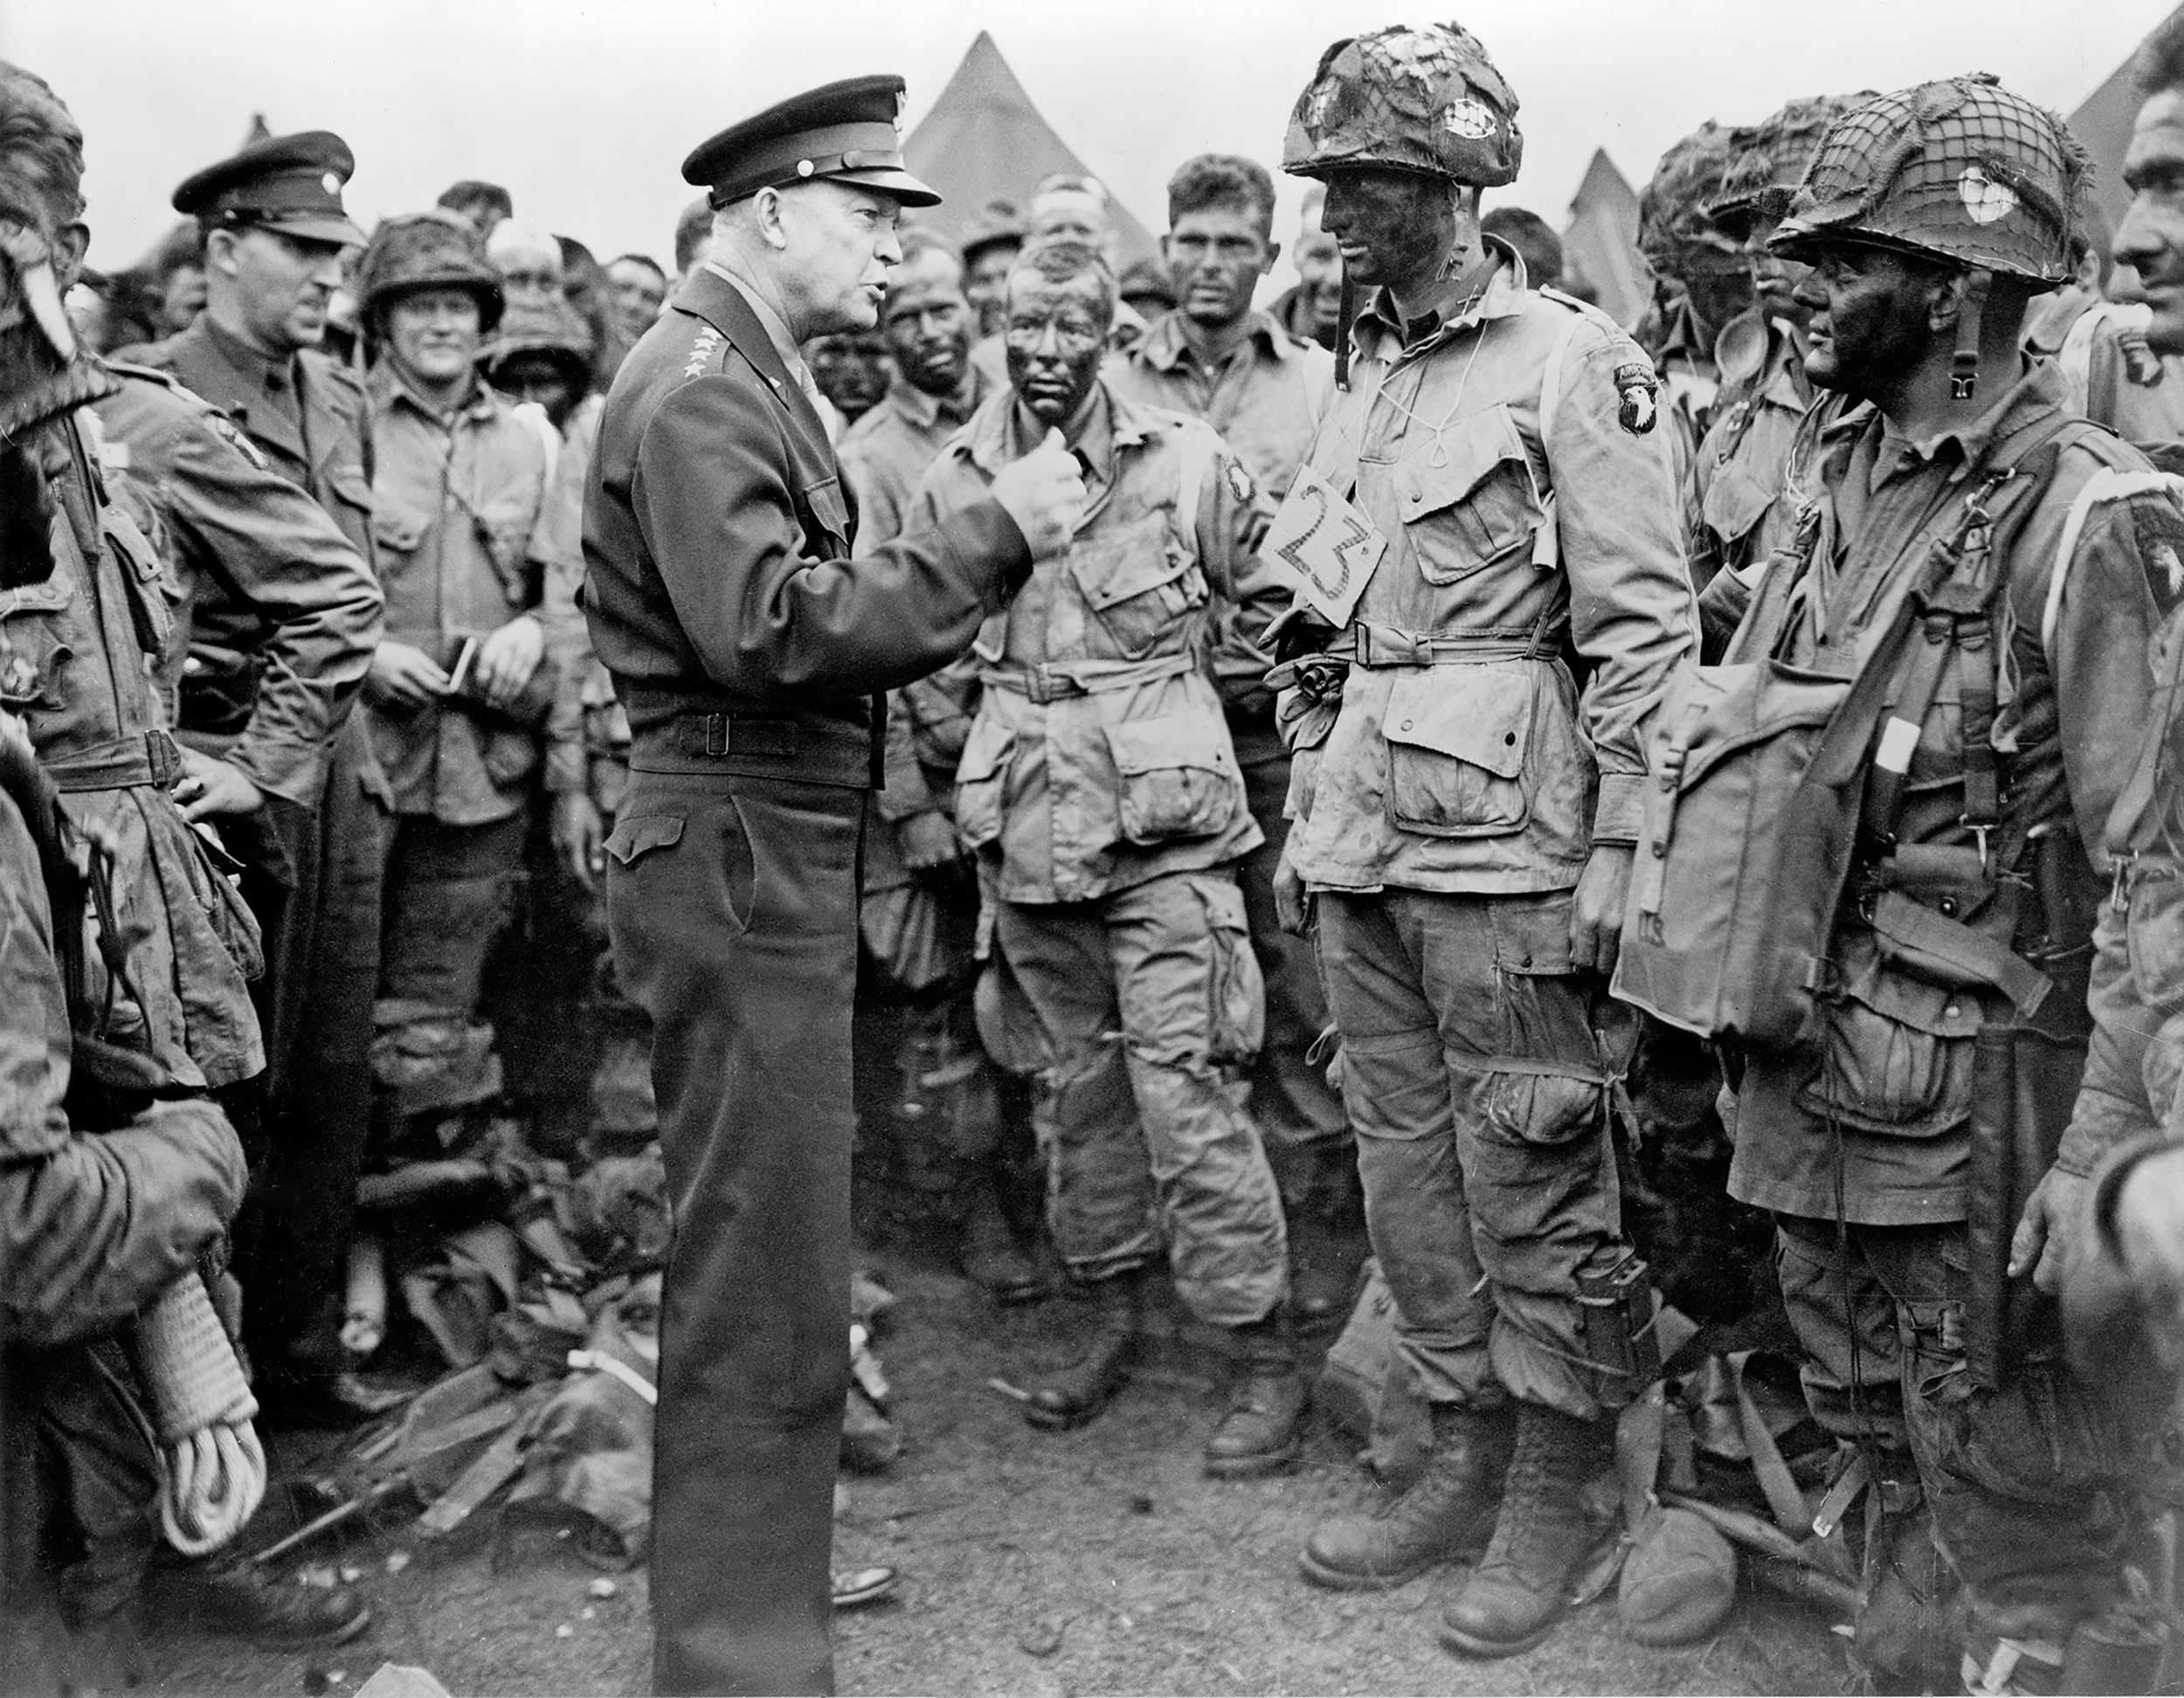 Eisenhower meets with Company E, 502nd Parachute Infantry Regiment (Strike), of 101st Airborne Division, at Royal Air Force Greenham Common, England, about 8:30 p.m., on June 5, 1944, and speaks to, among others, Wallace C. Strobel